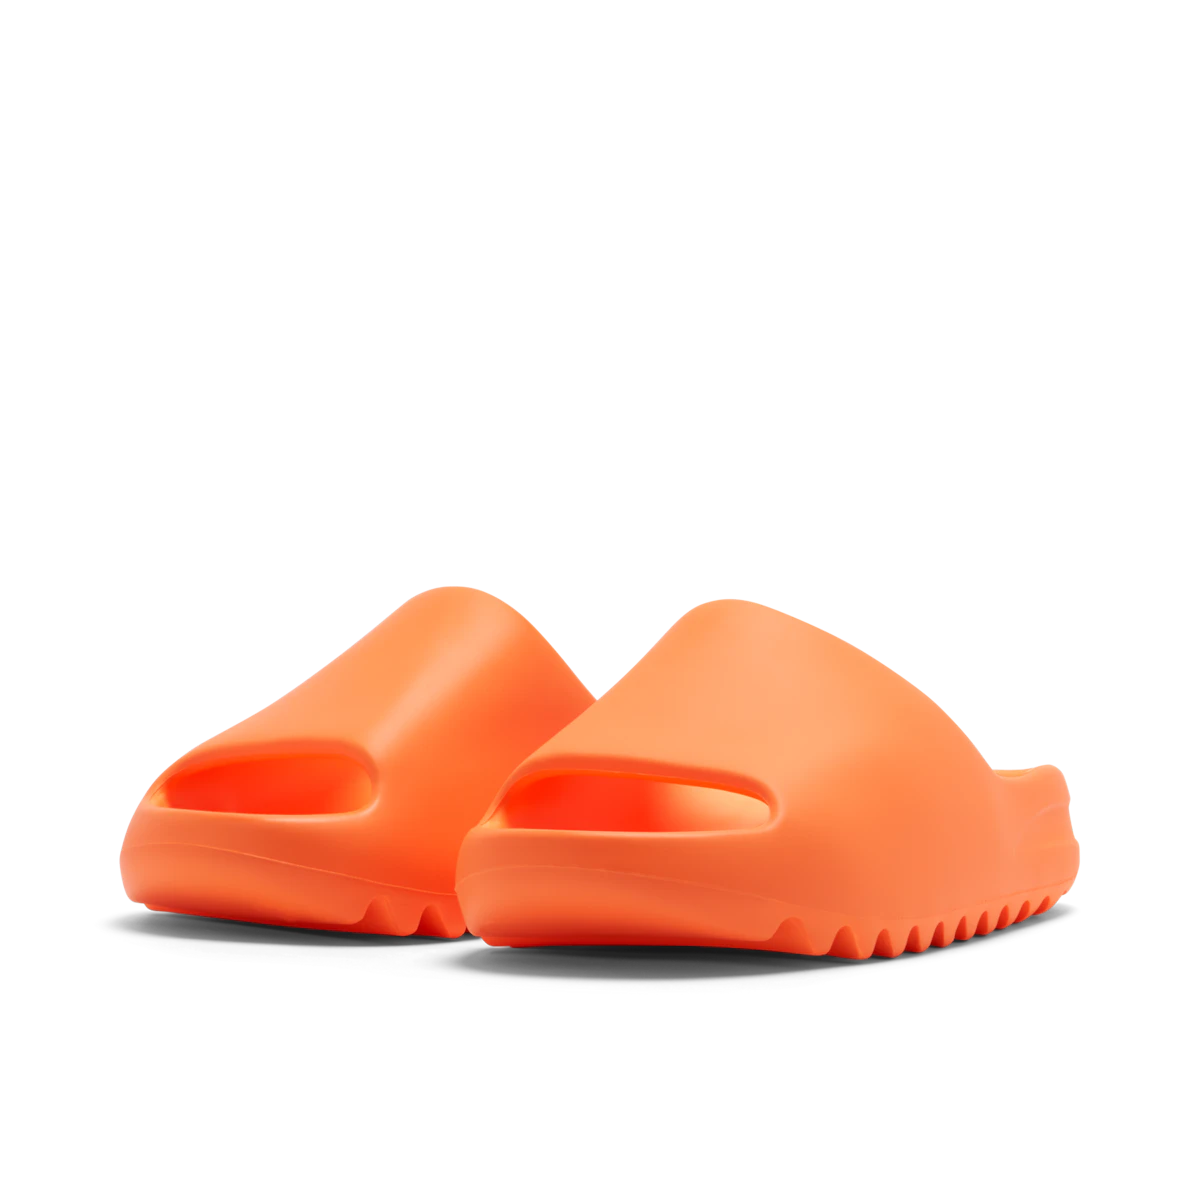 adidas Yeezy Slide Enflame Orange by Yeezy from £150.00